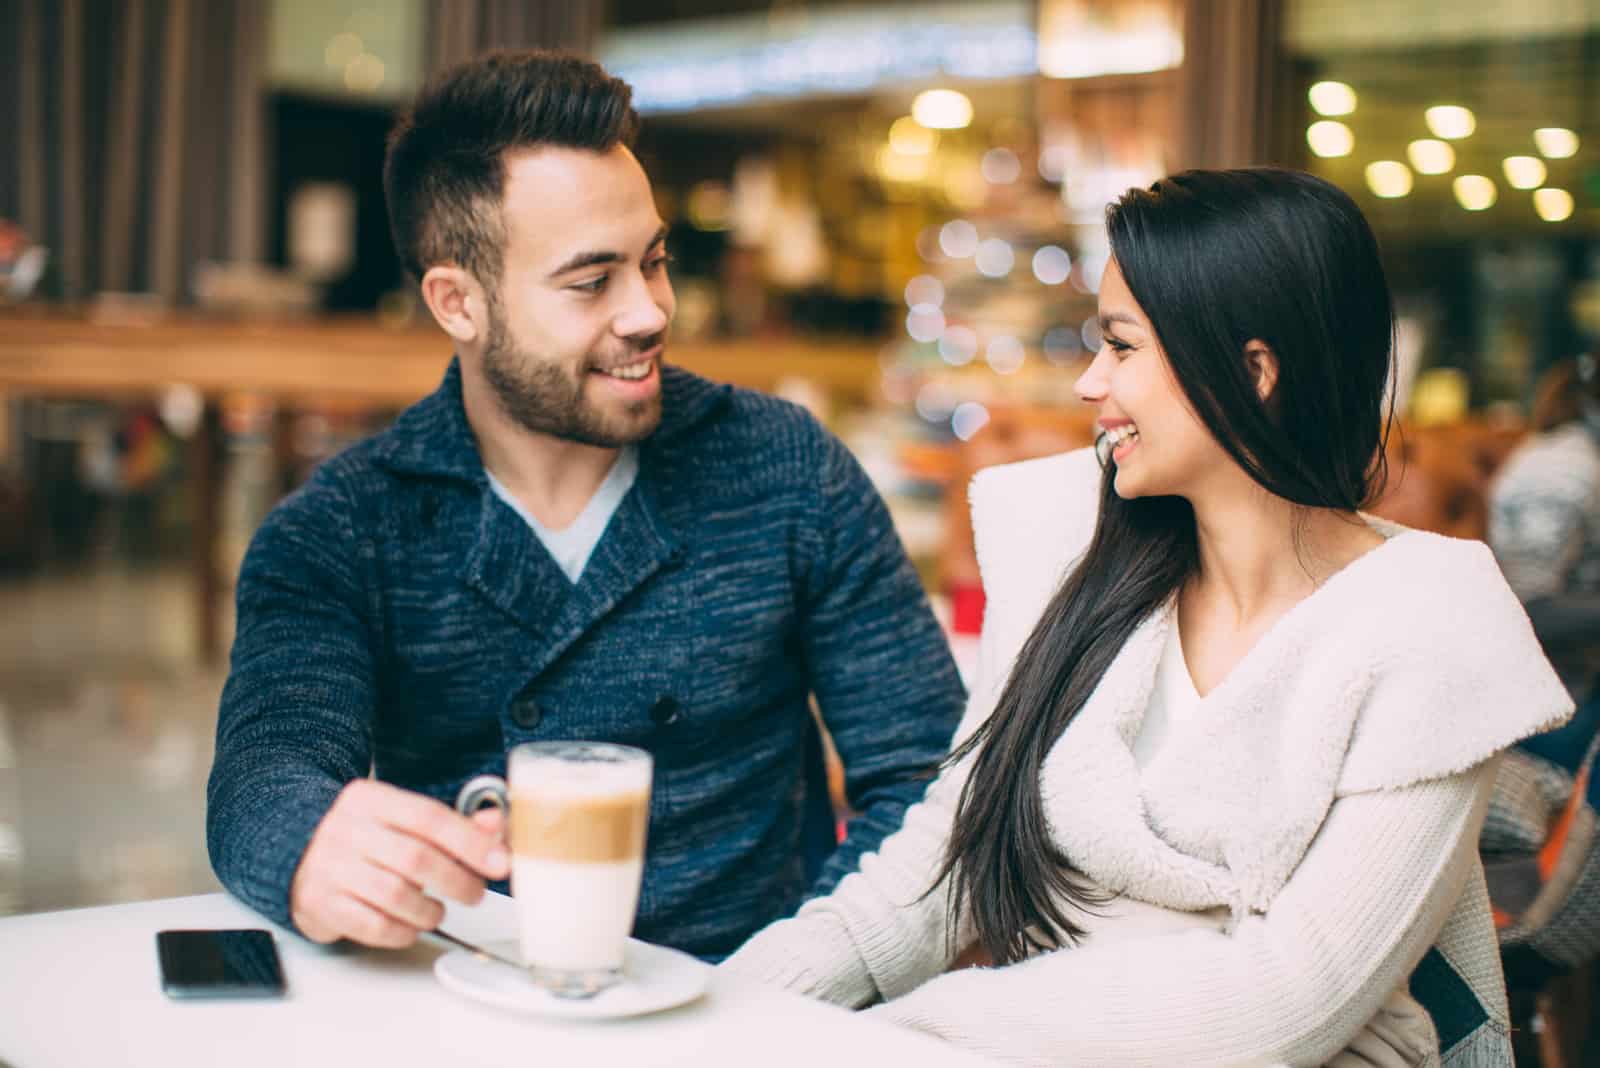 We Act Like A Couple, But We Are Not Official: Why And What To Do